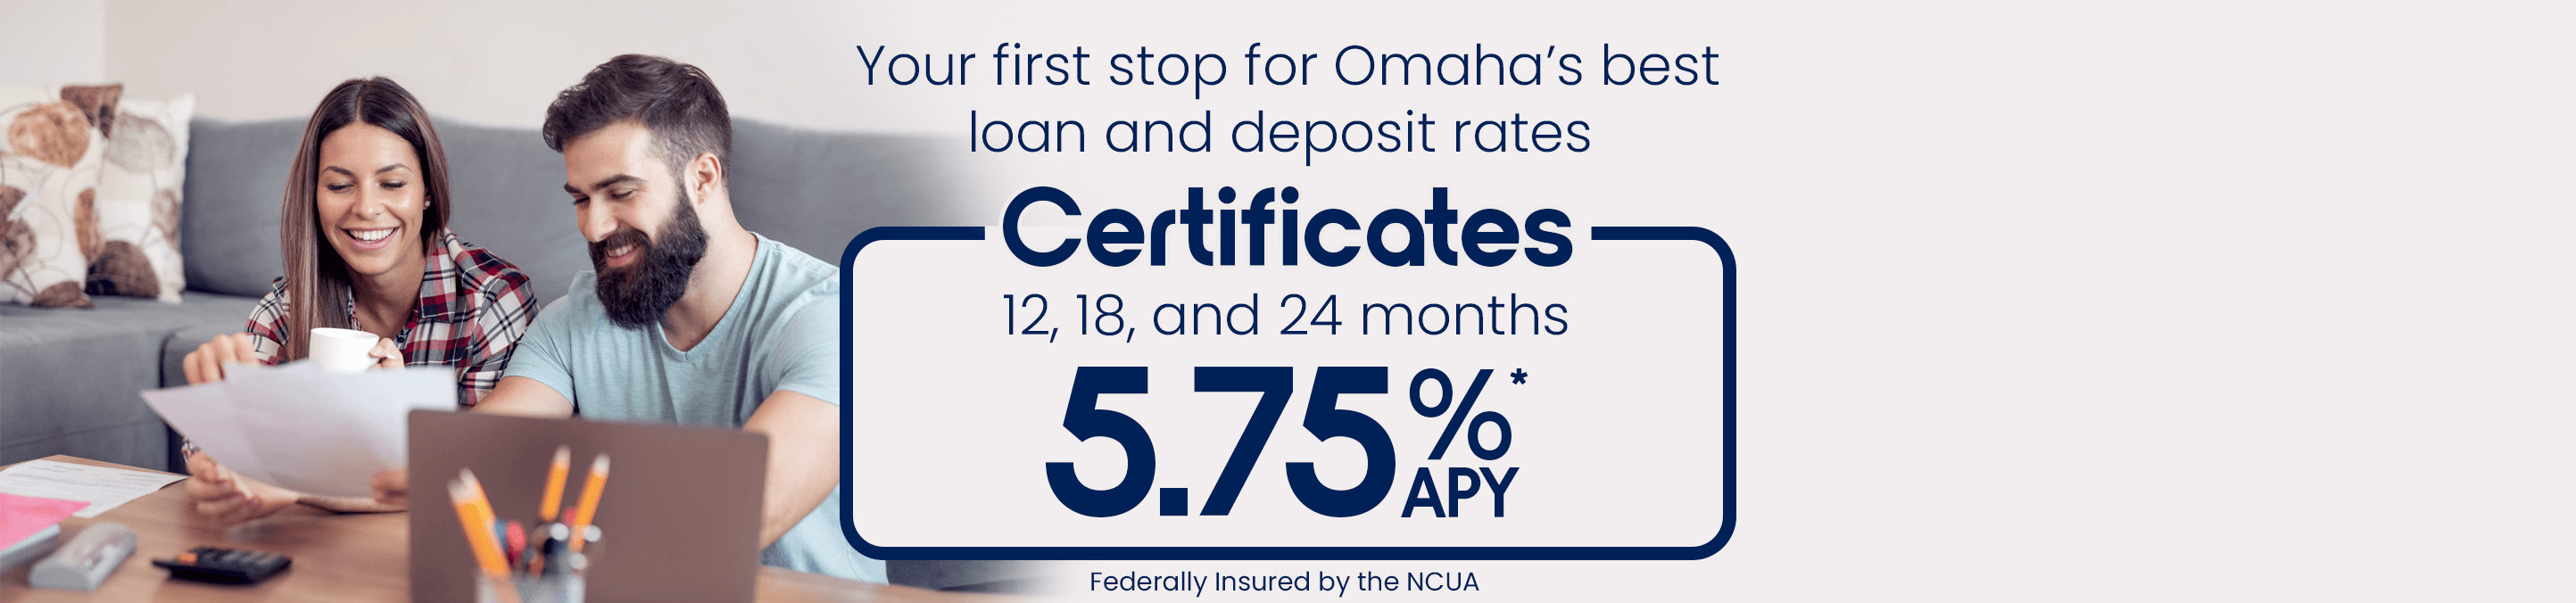 Your first stop for Omaha's best loan and deposit rates